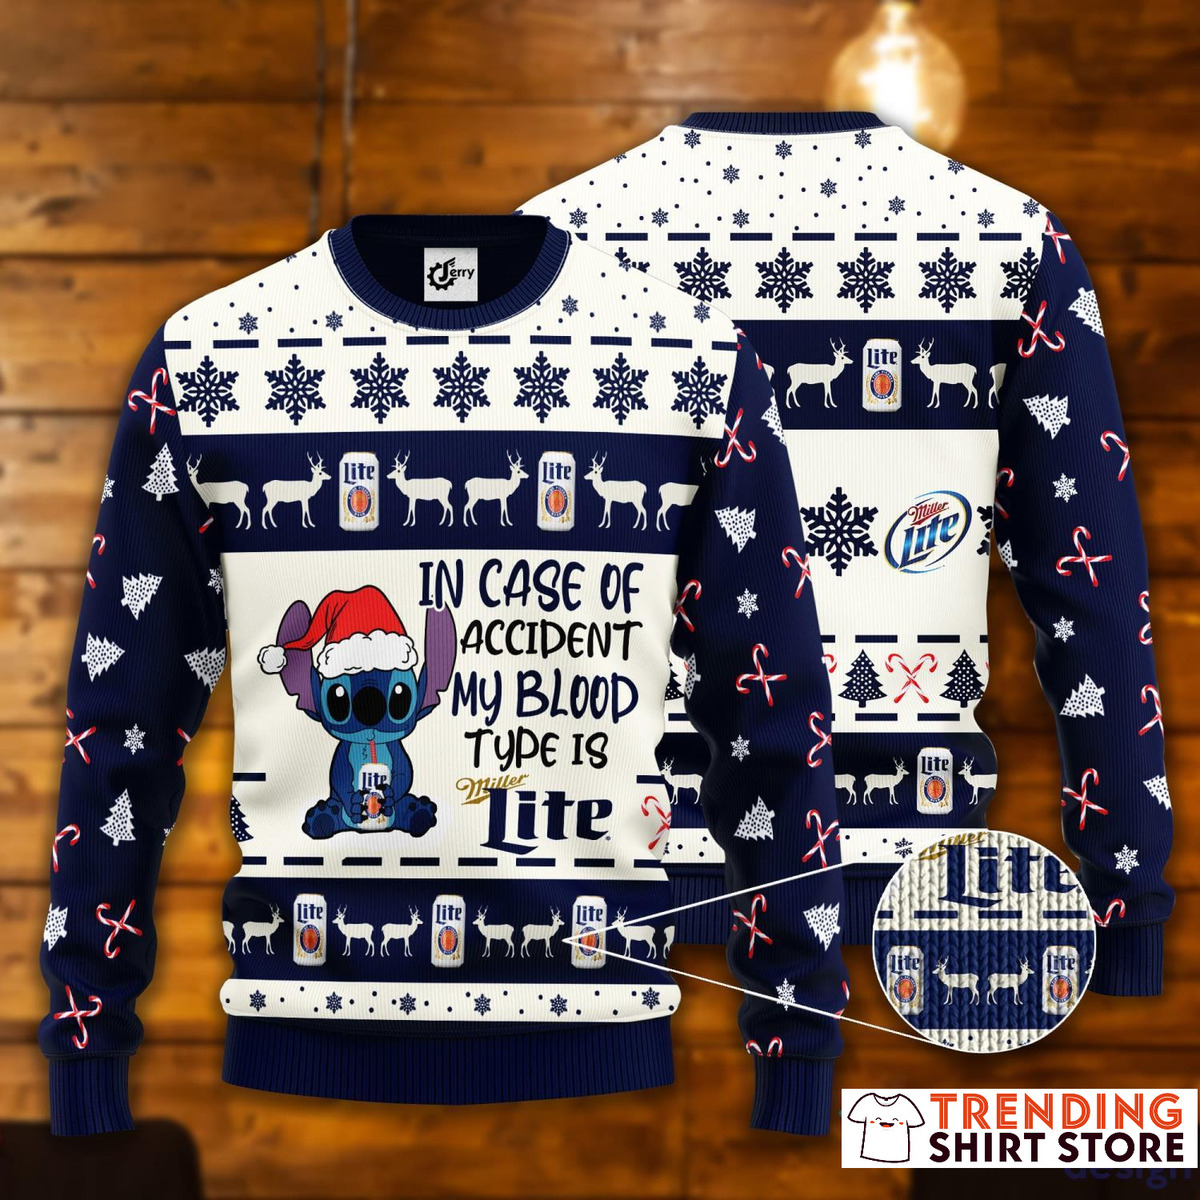 Stitch In Case Of Accident My Blood Type Is Miller Lite Ugly Christmas Sweater